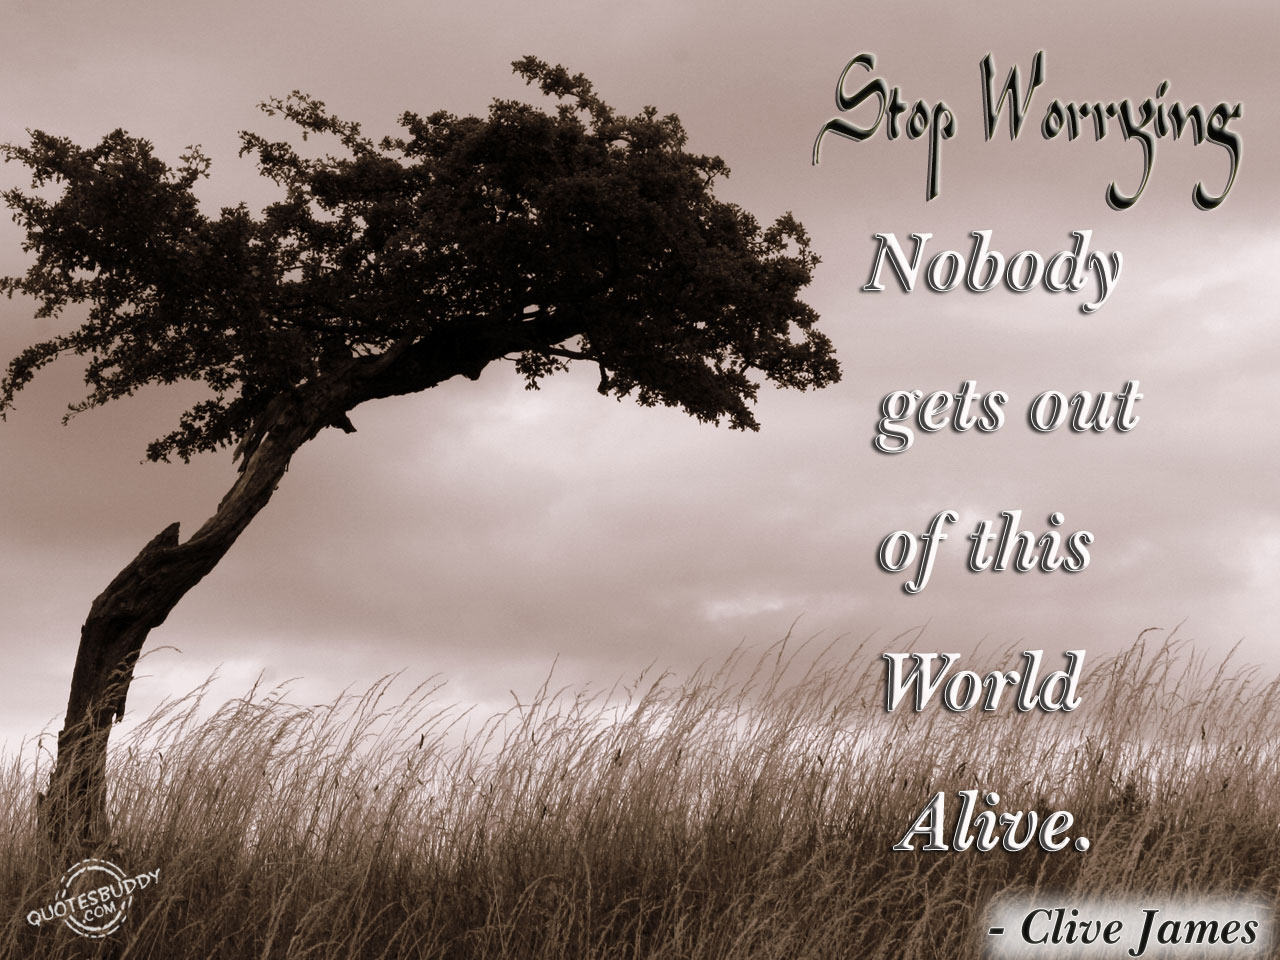 Stop worrying nobody gets out of this world alive. Clive James